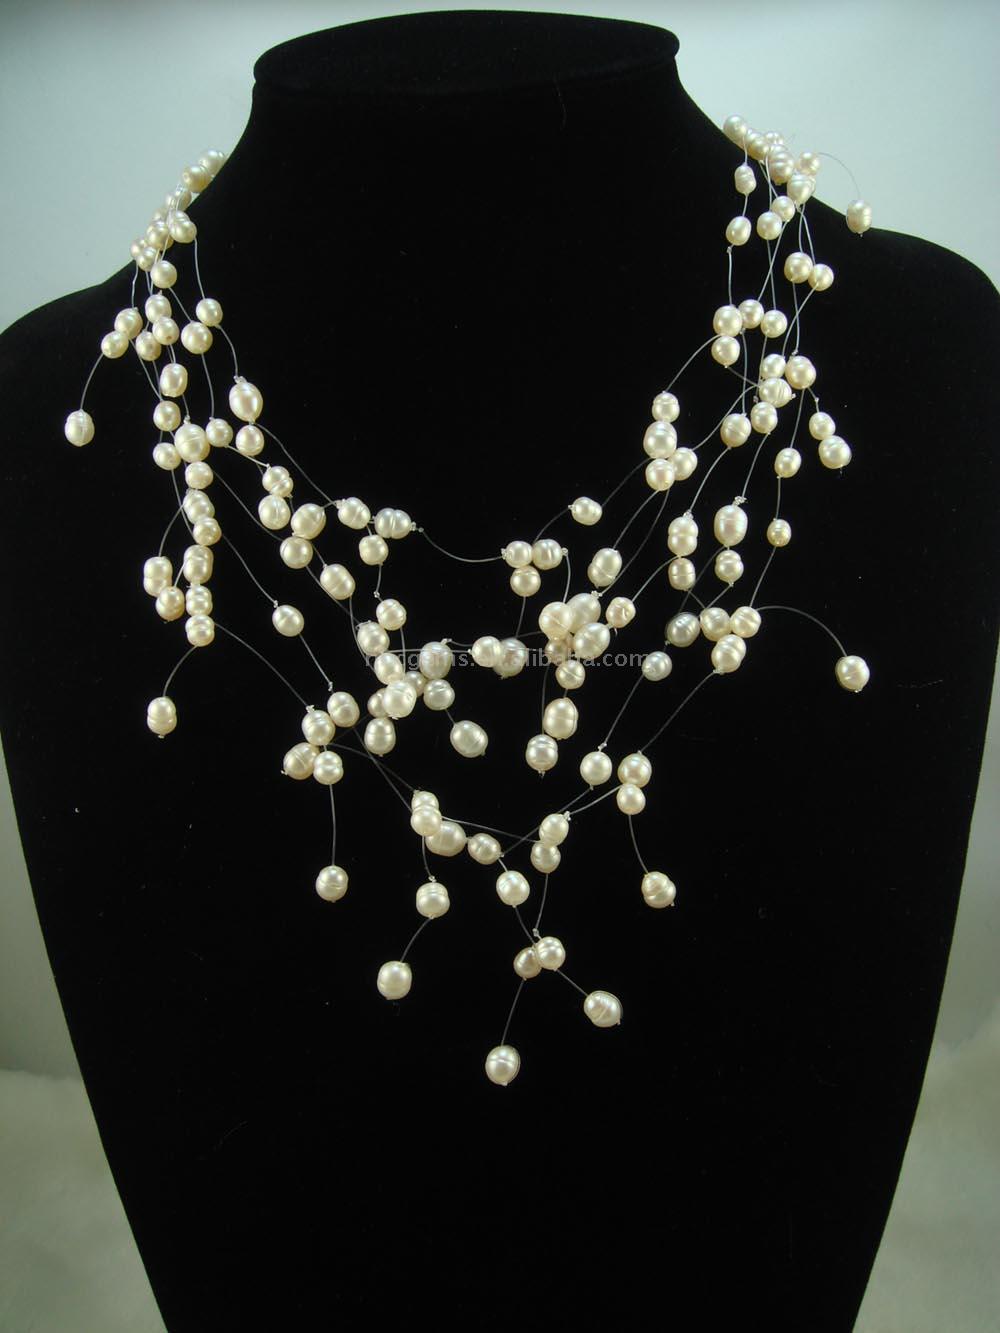  Pearl Necklace 1021 (Pearl Necklace 1021)